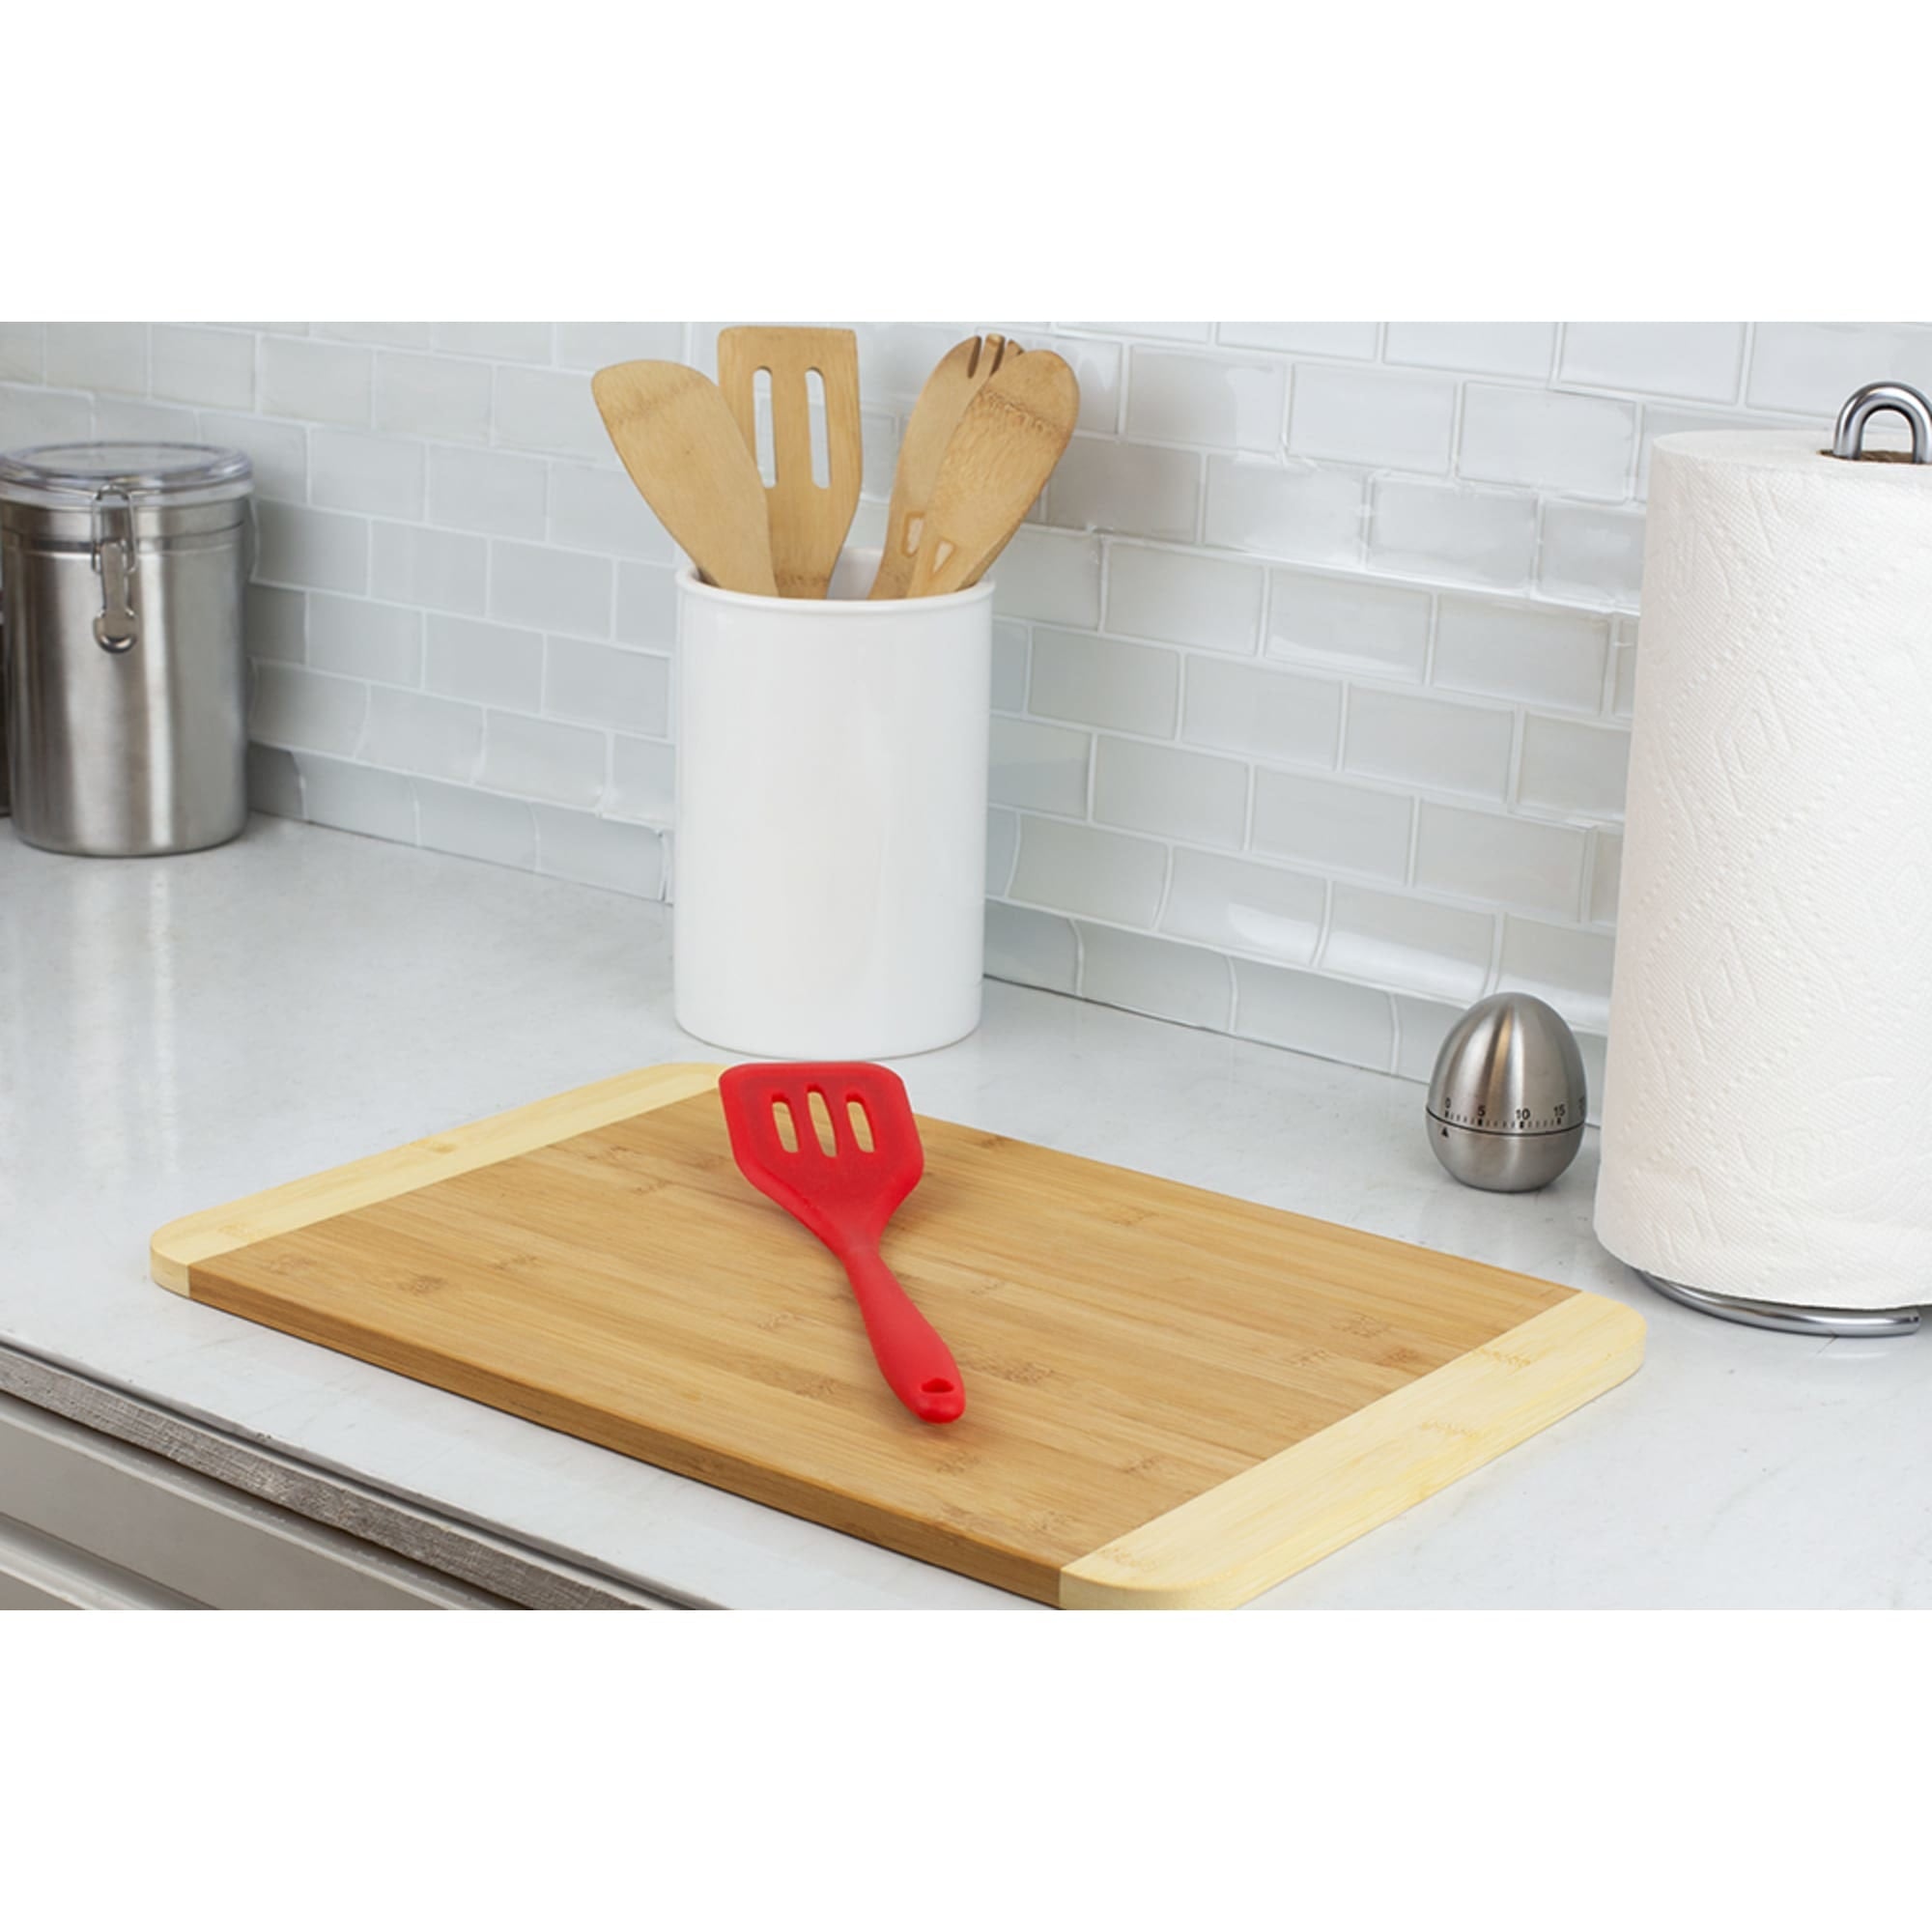 Home Basics Heat-Resistant Silicone Spatula, Red $3.00 EACH, CASE PACK OF 24